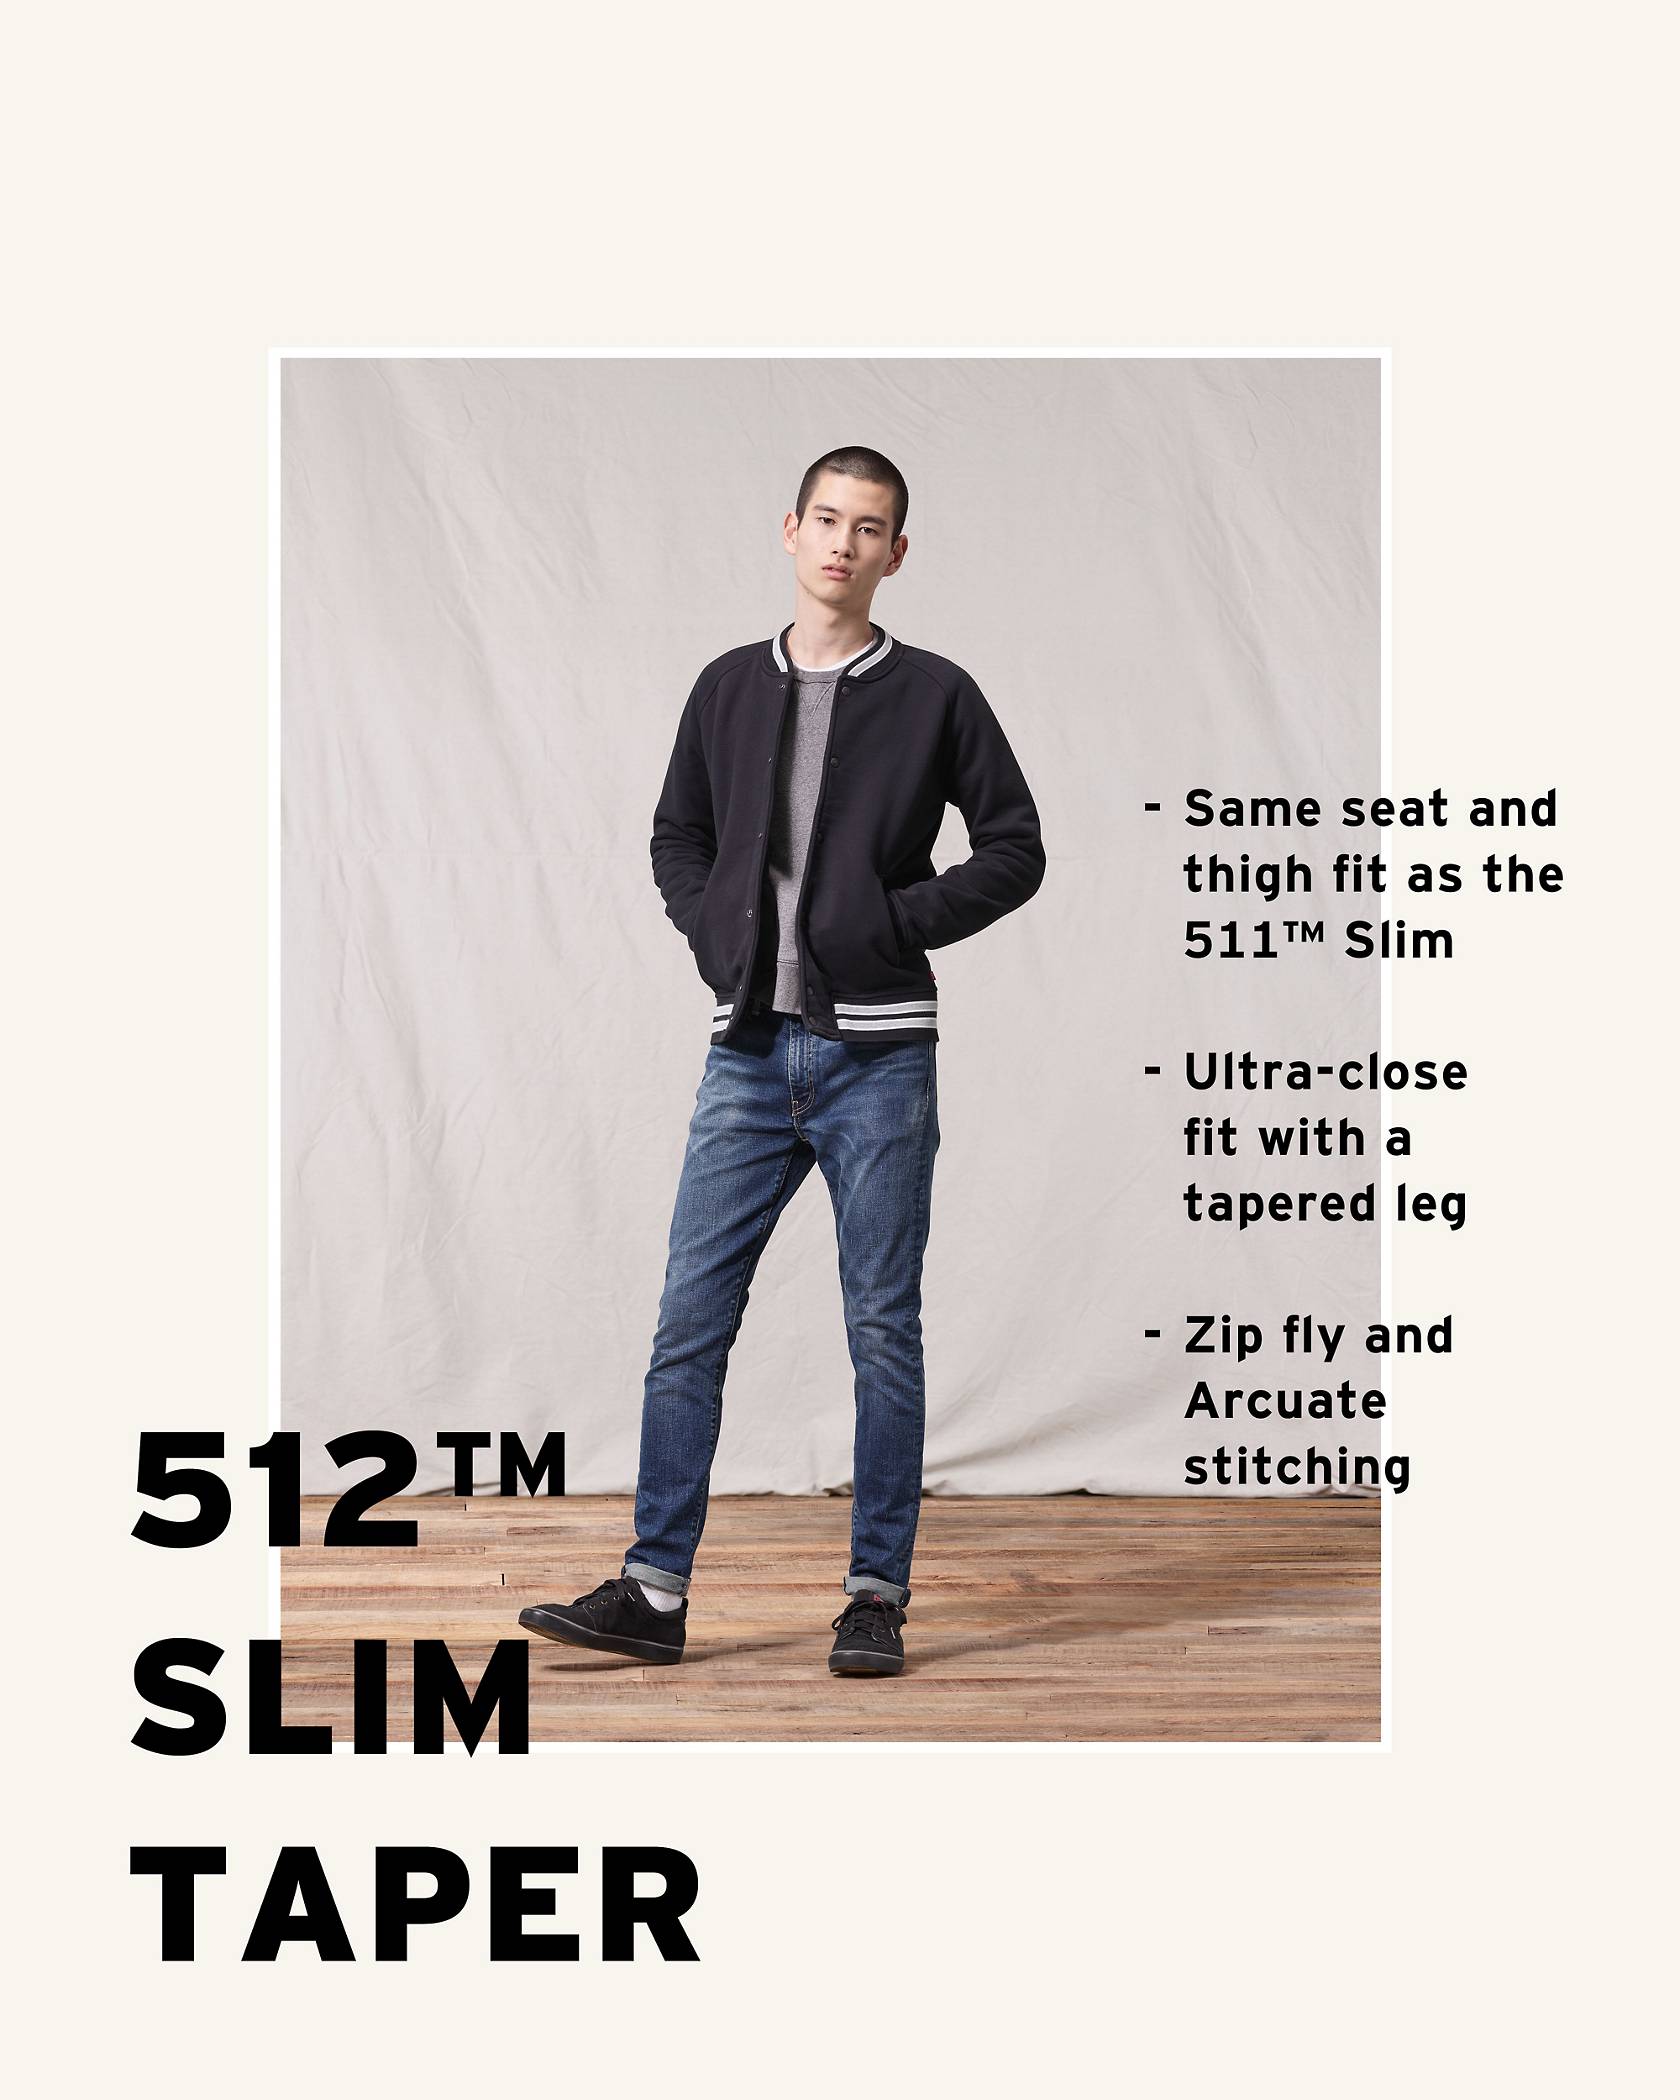 Model wearing a black jacket and 512™ Slim Taper jean while putting his hands in his jacket's pockets and looking at the camera.